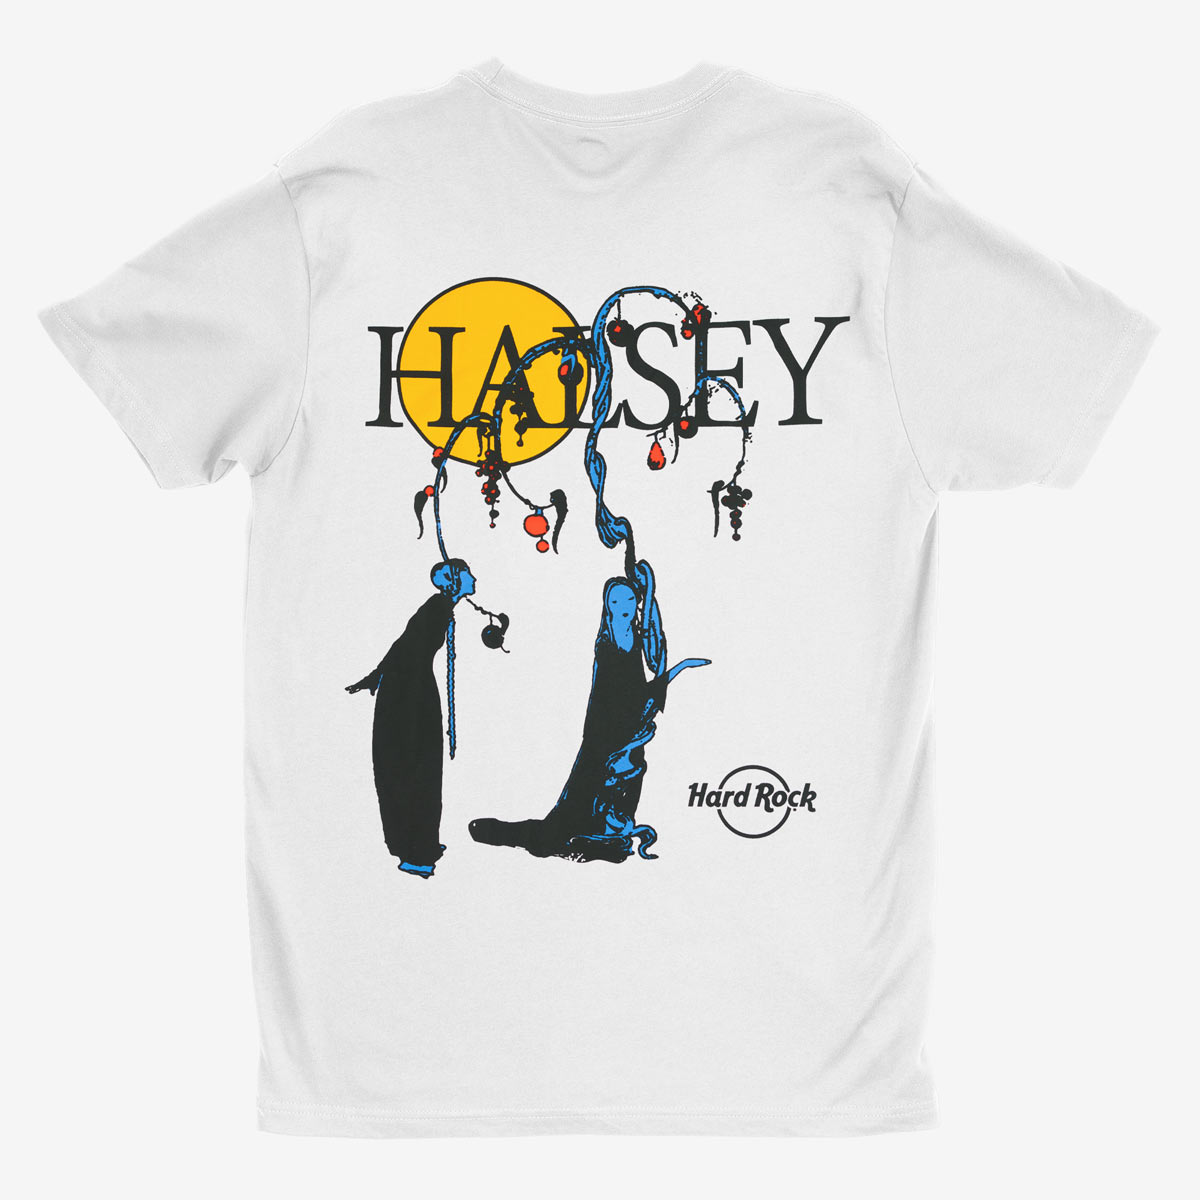 Halsey Adult Fit Tee in White with Logo and Back Design image number 3